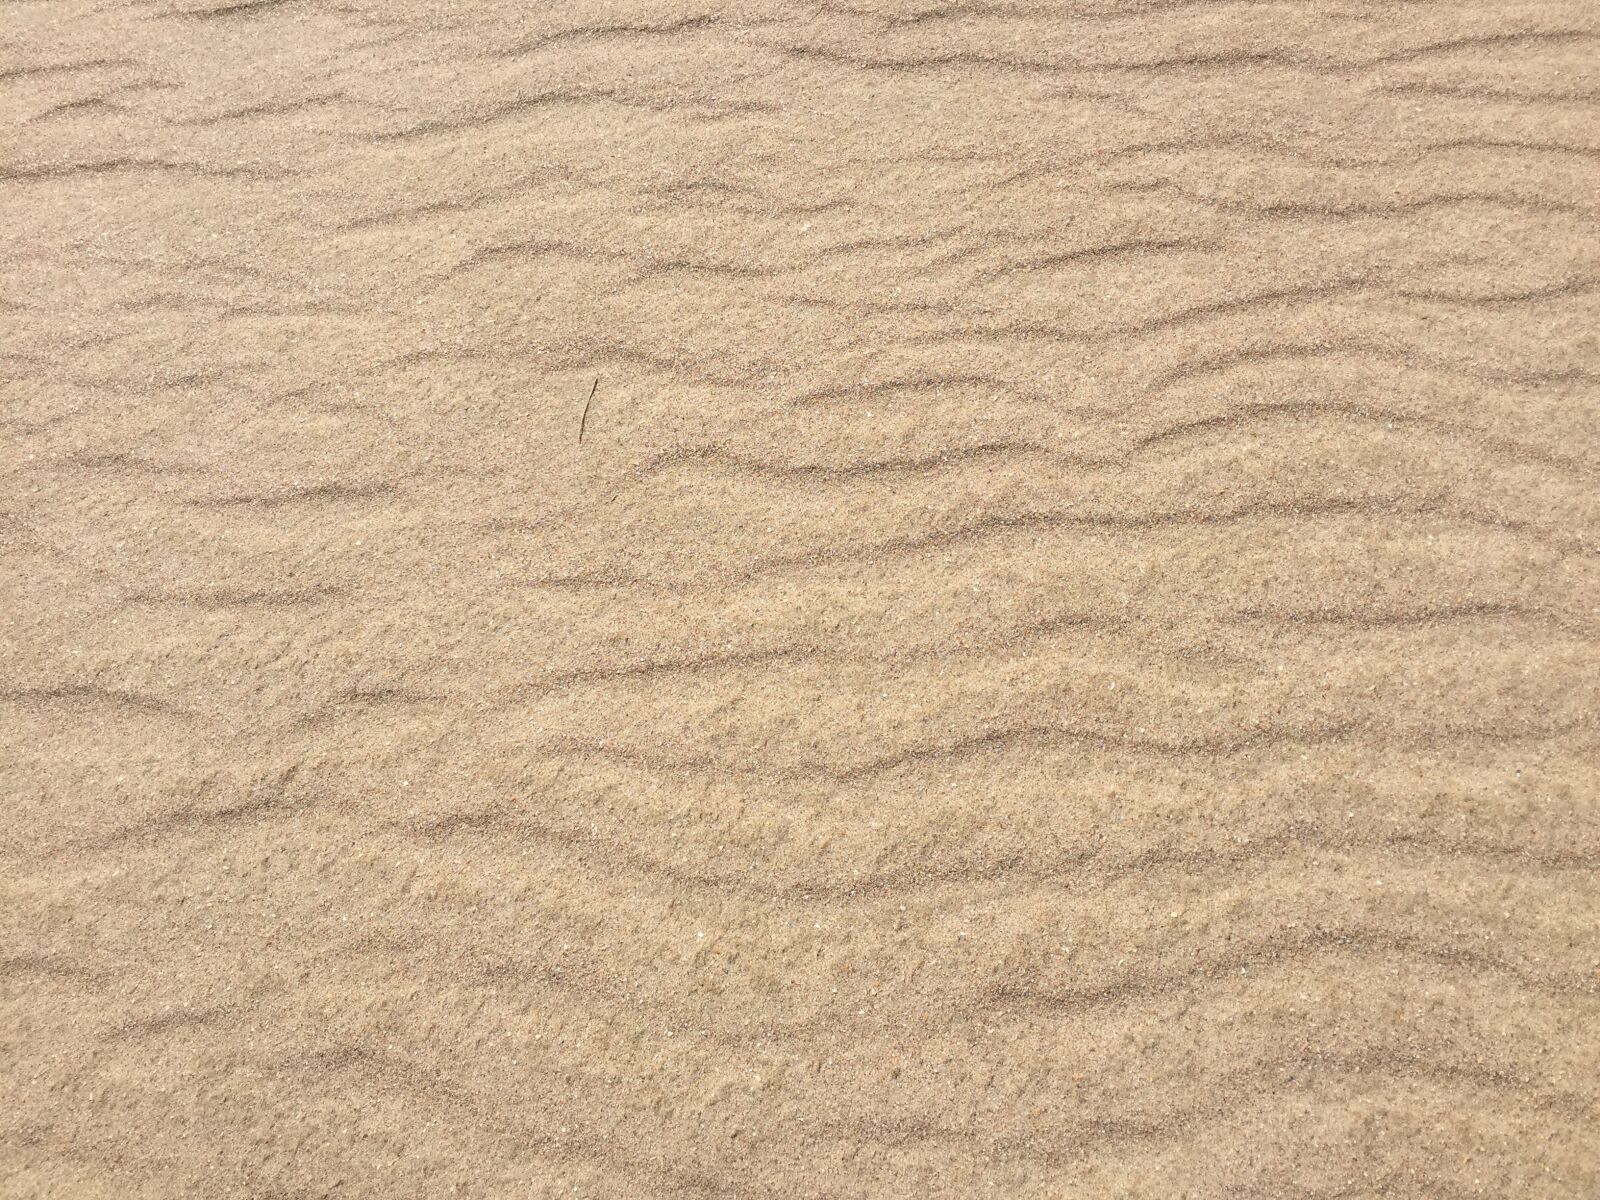 Apple iPhone 6 sample photo. Sand, dunes, sand color photography